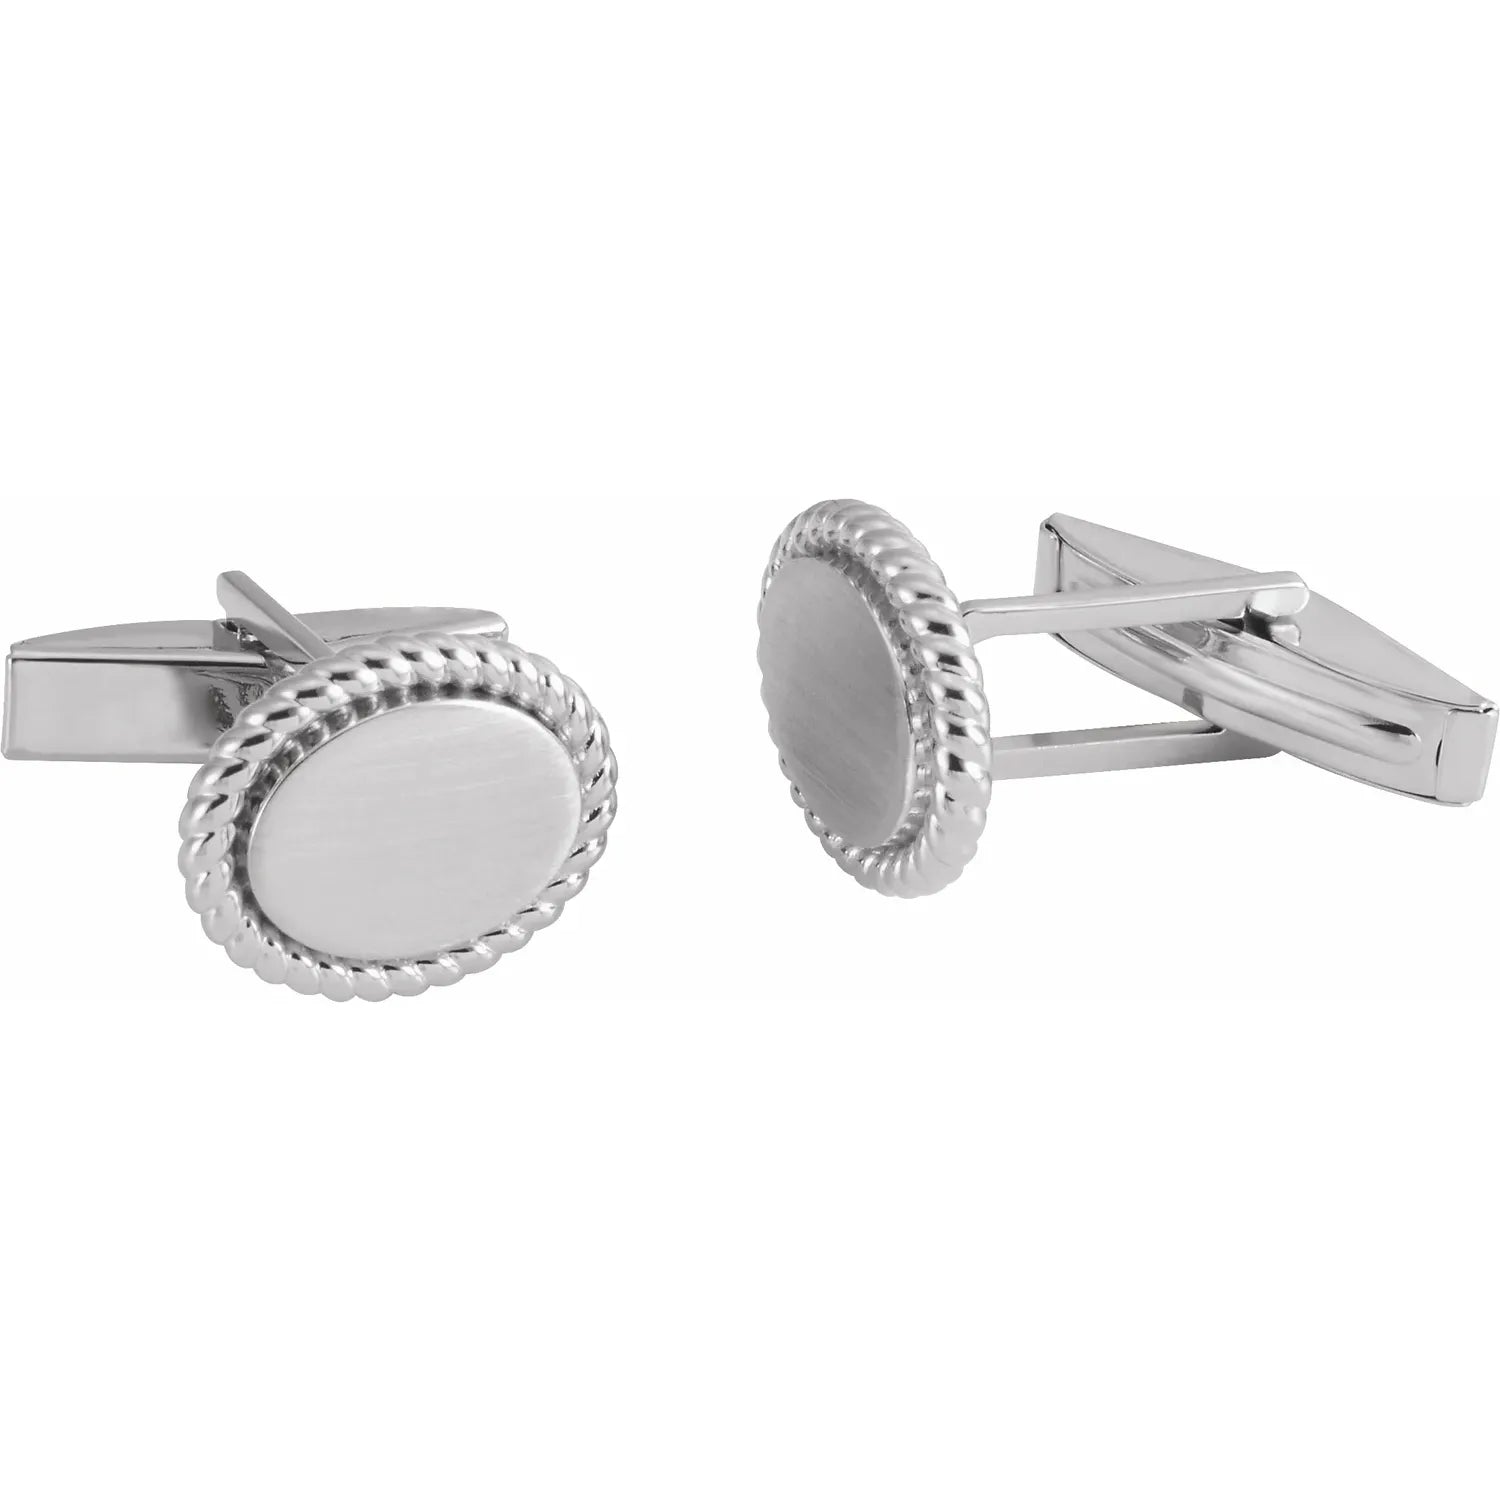 Cufflink - Polished Rope Patterned (Sterling Silver, 14k Yellow, or 14k White Gold)